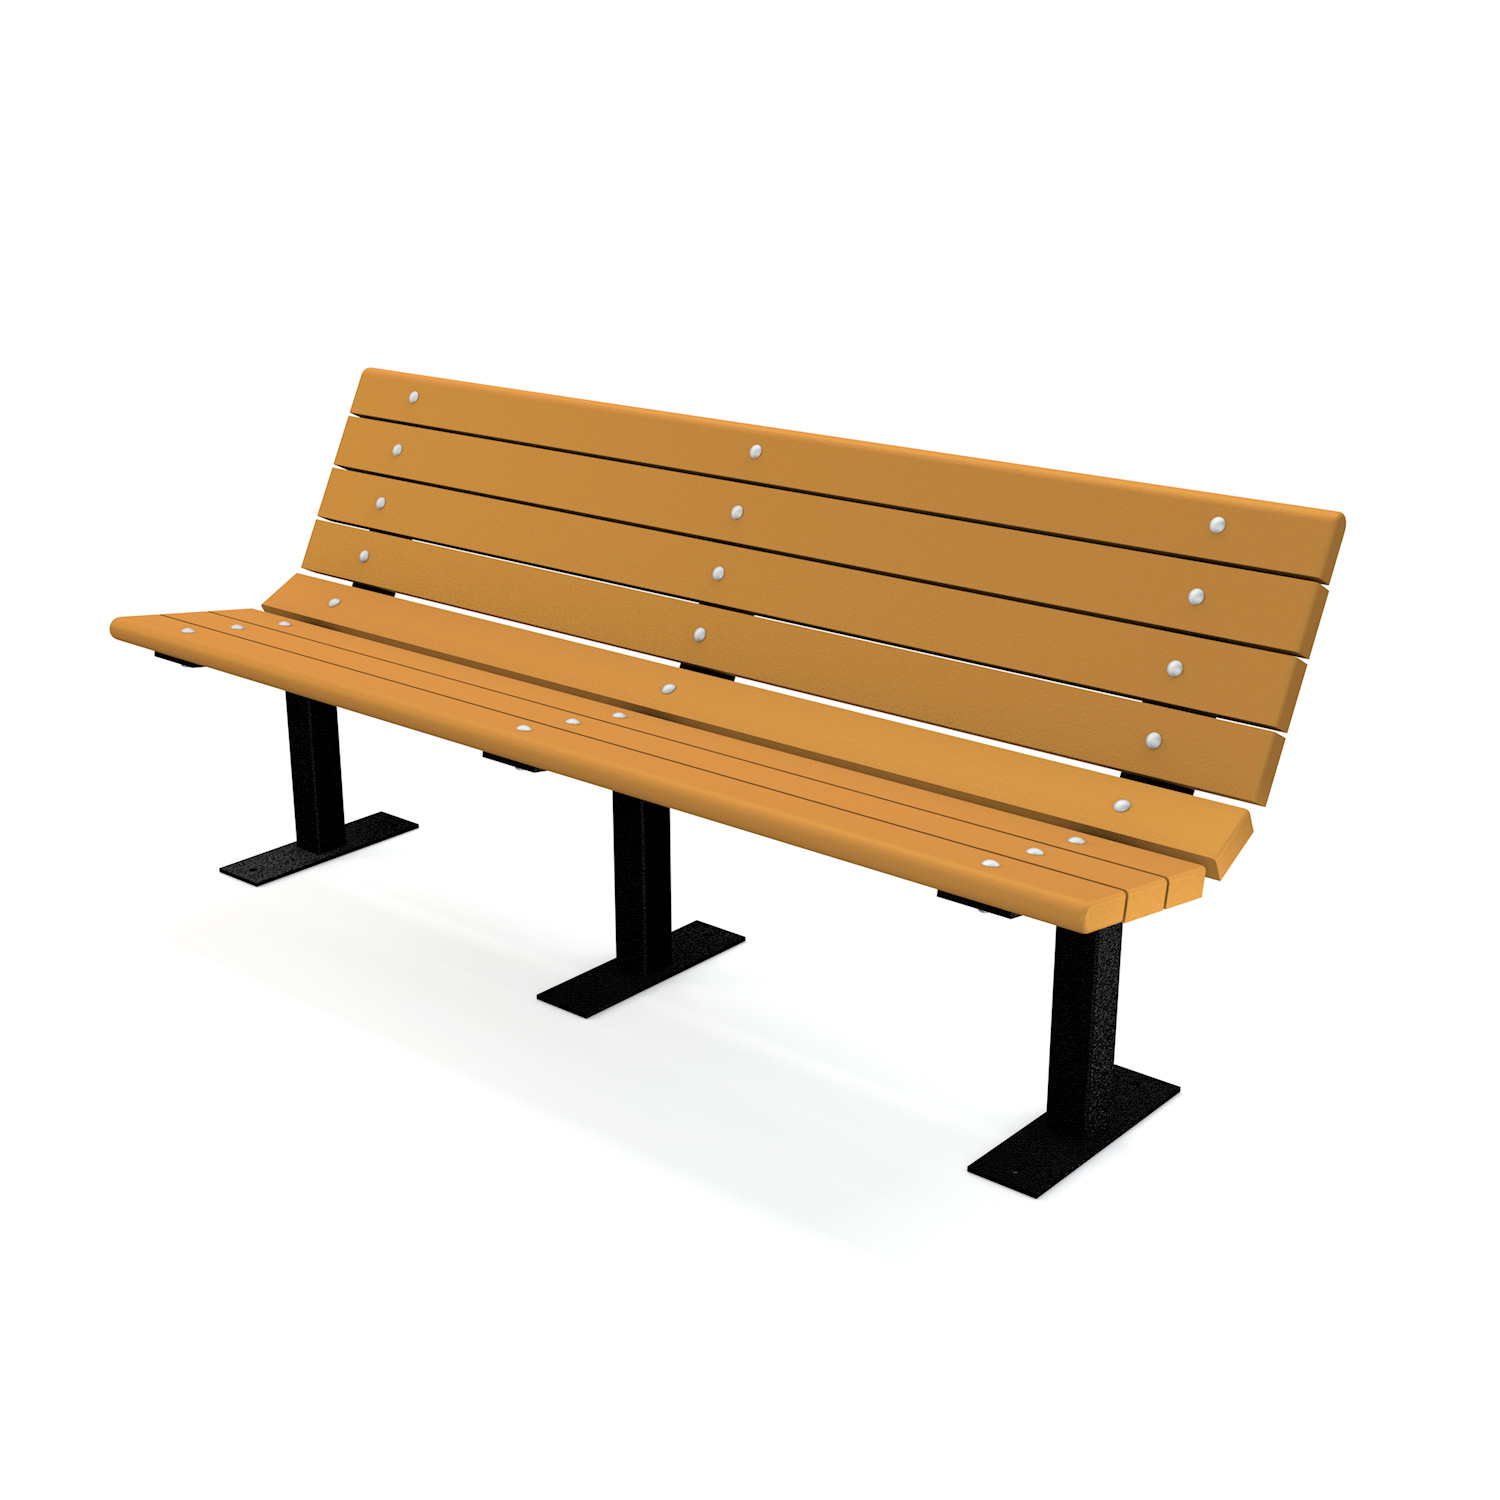 Contoured Recycled Park Bench | Available in 4, 6, or 8 ft lengths